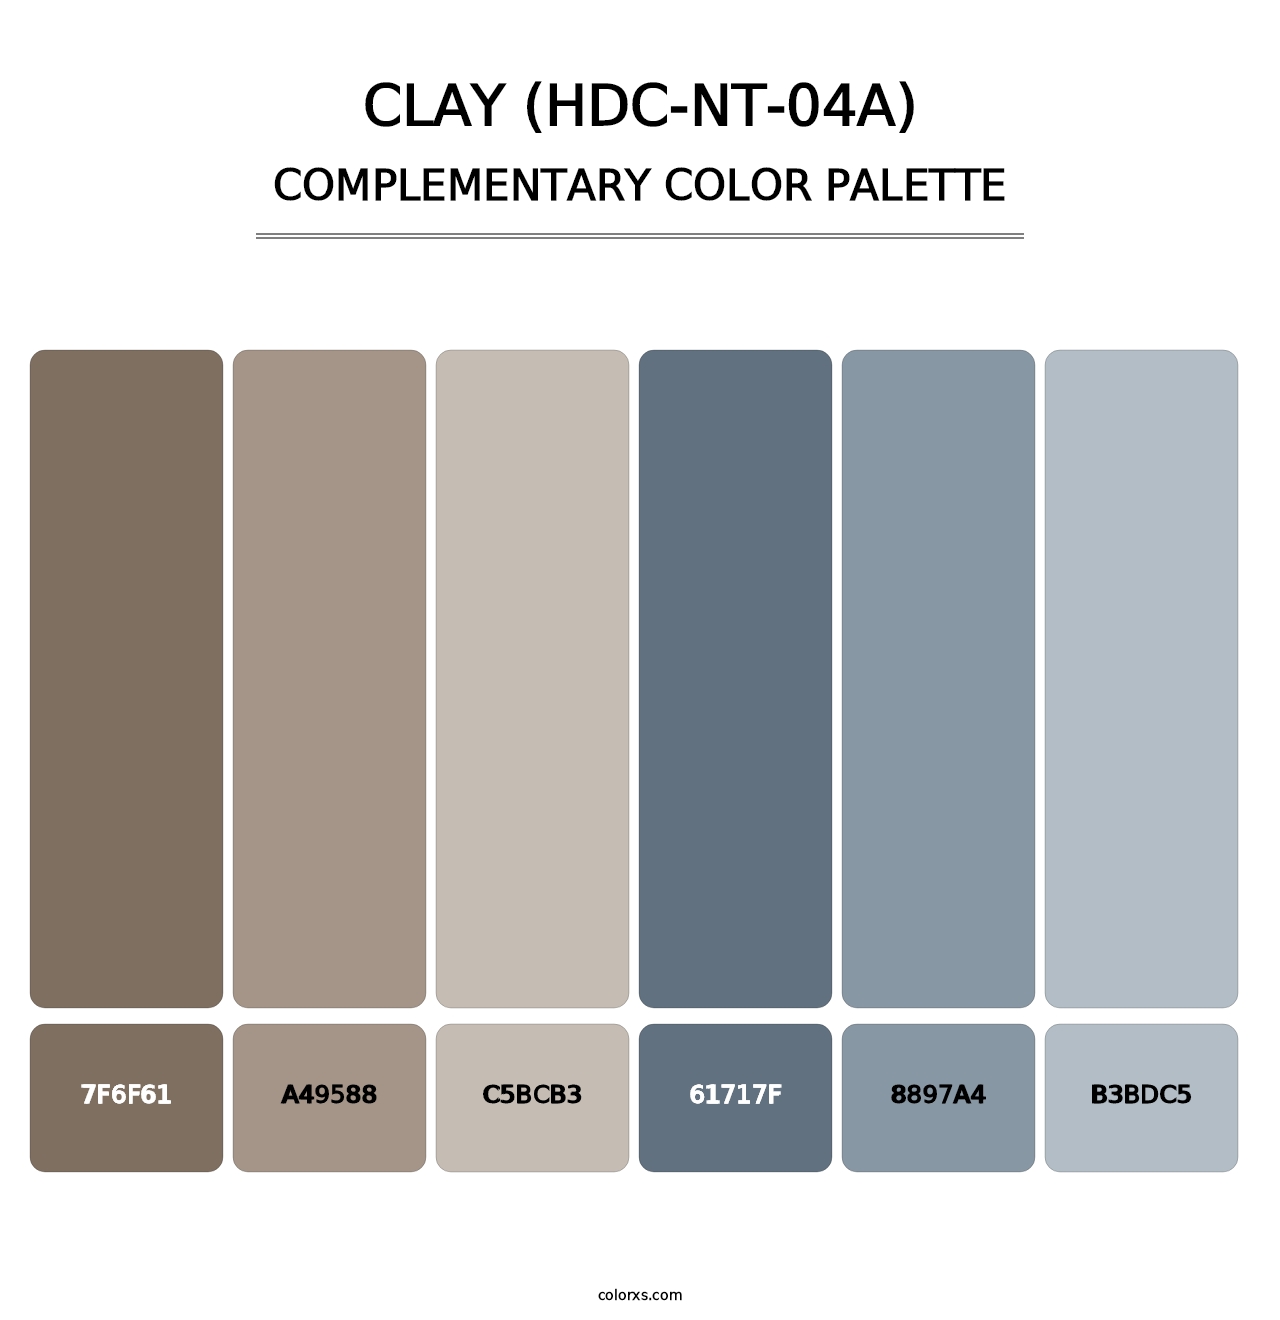 Clay (HDC-NT-04A) - Complementary Color Palette